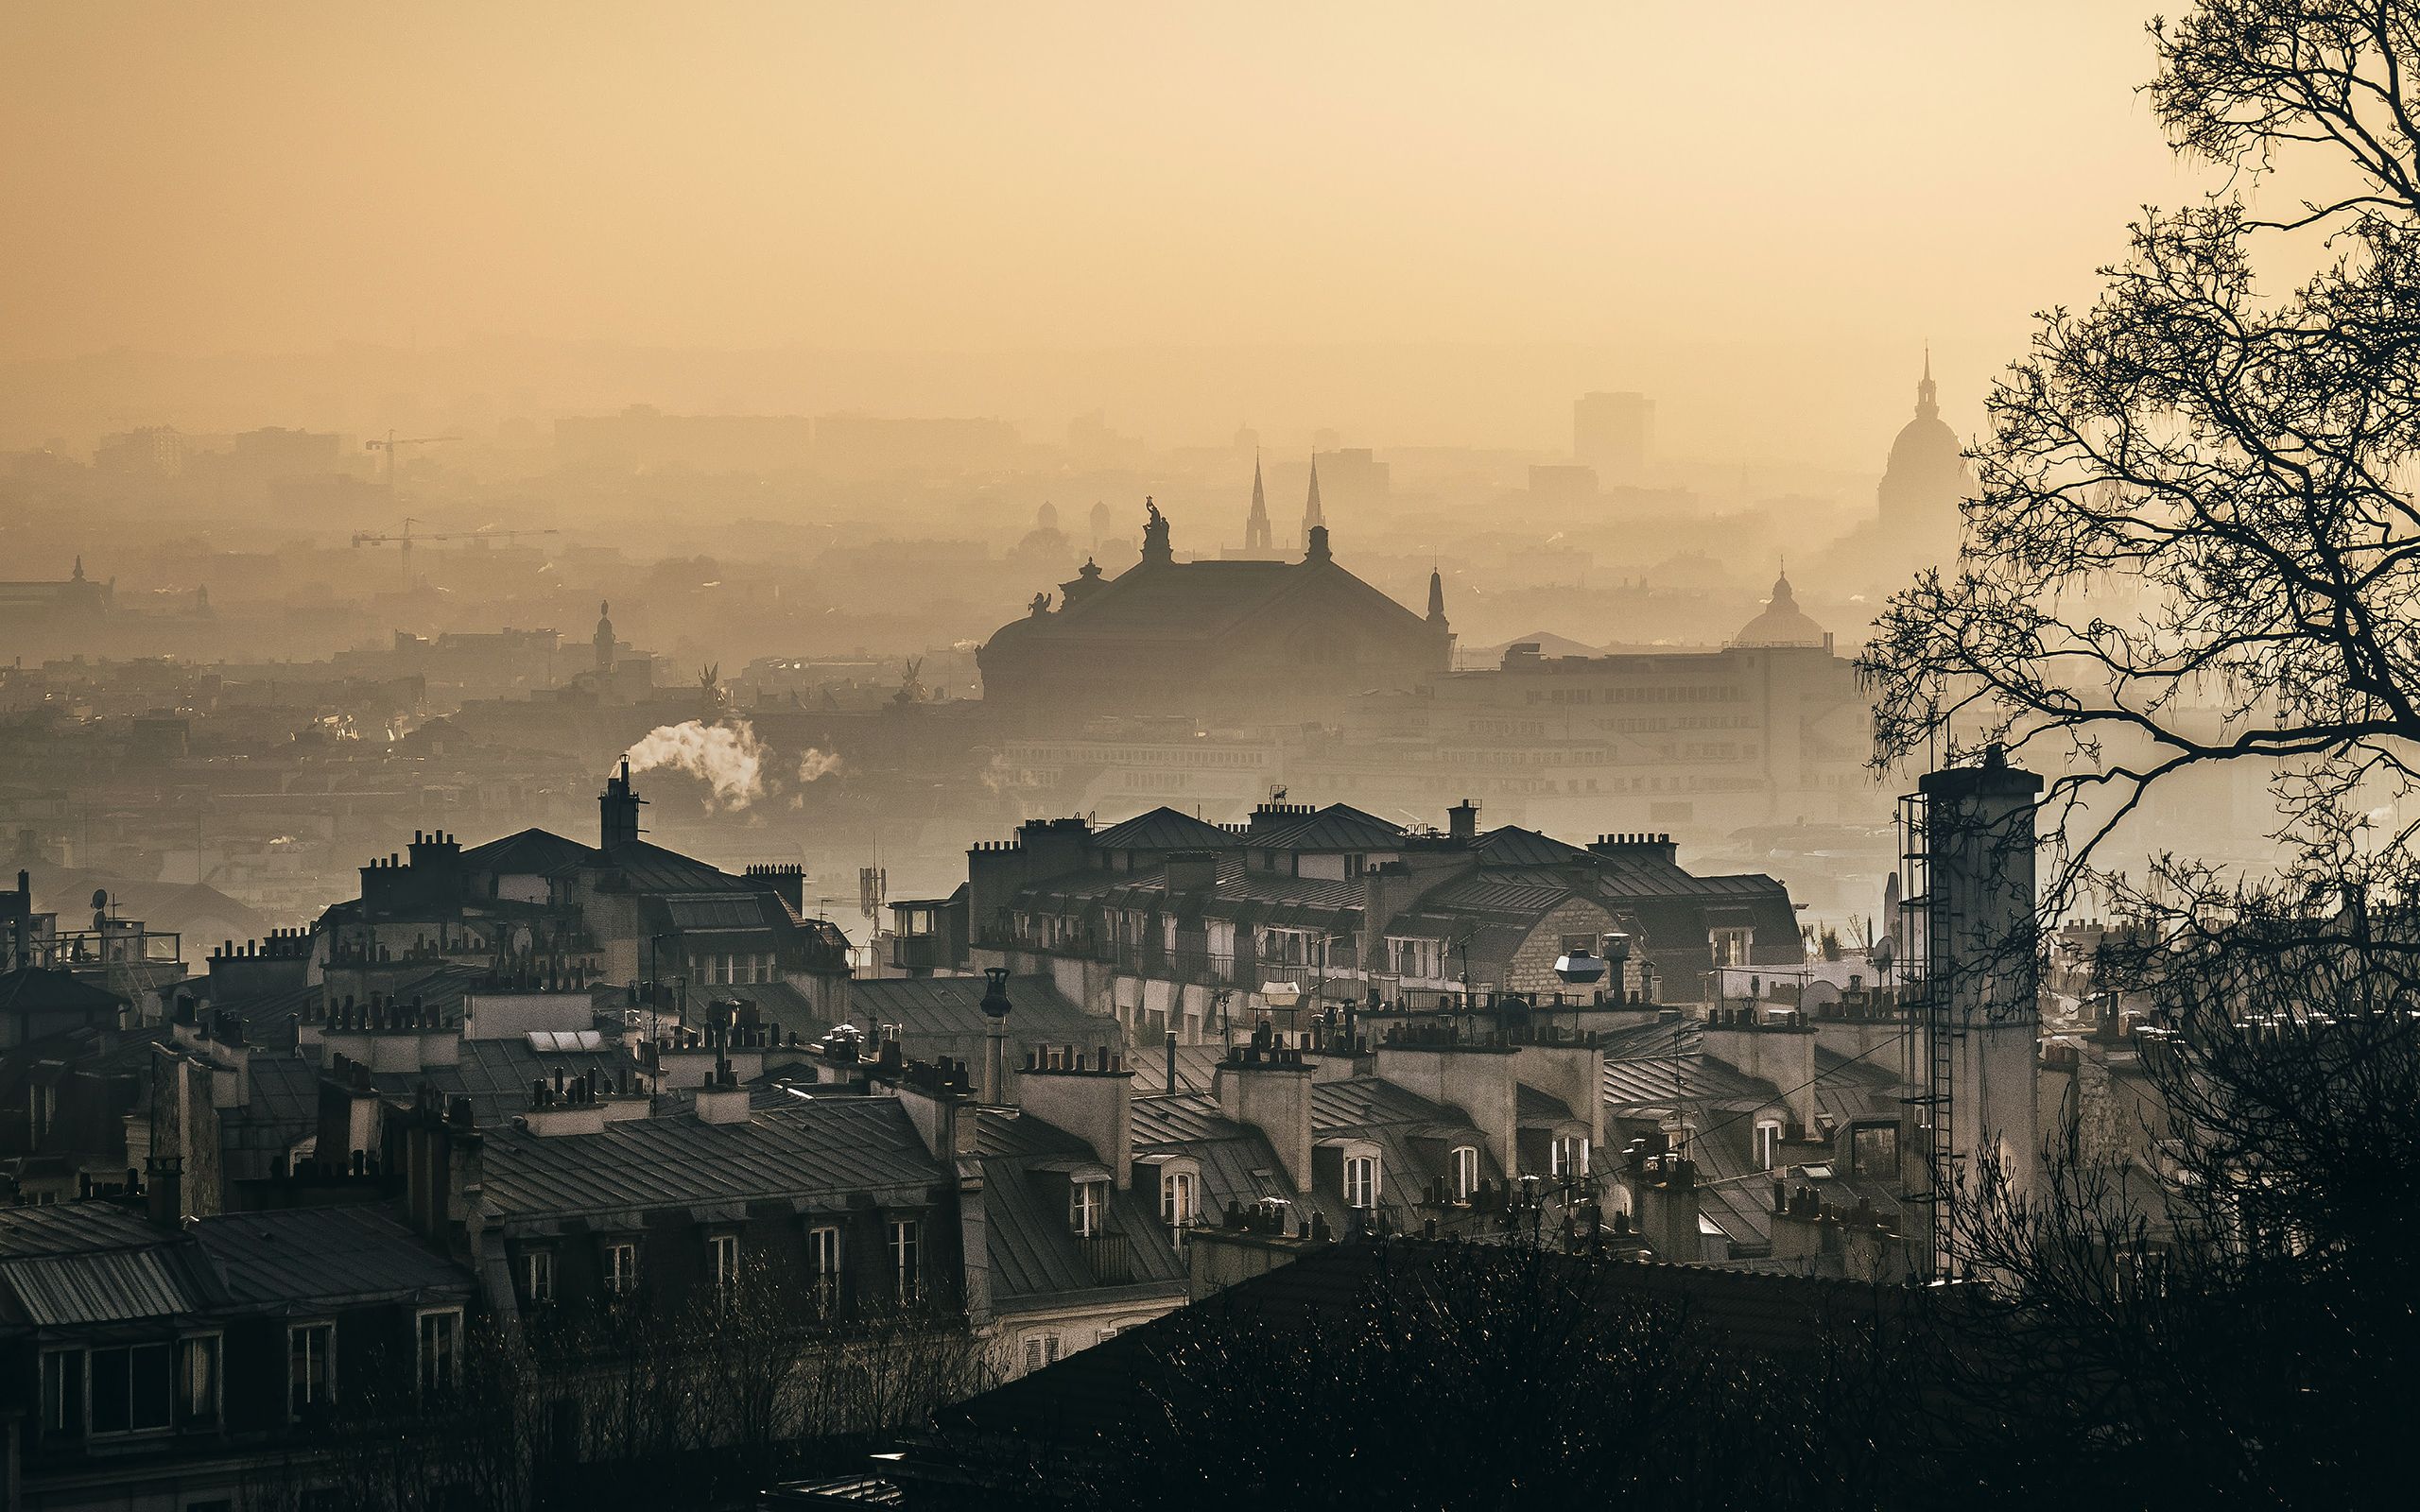 2560x1600 Daily Wallpaper: Foggy Morning in Paris, France. I Like To Waste My Time on WallpaperBat